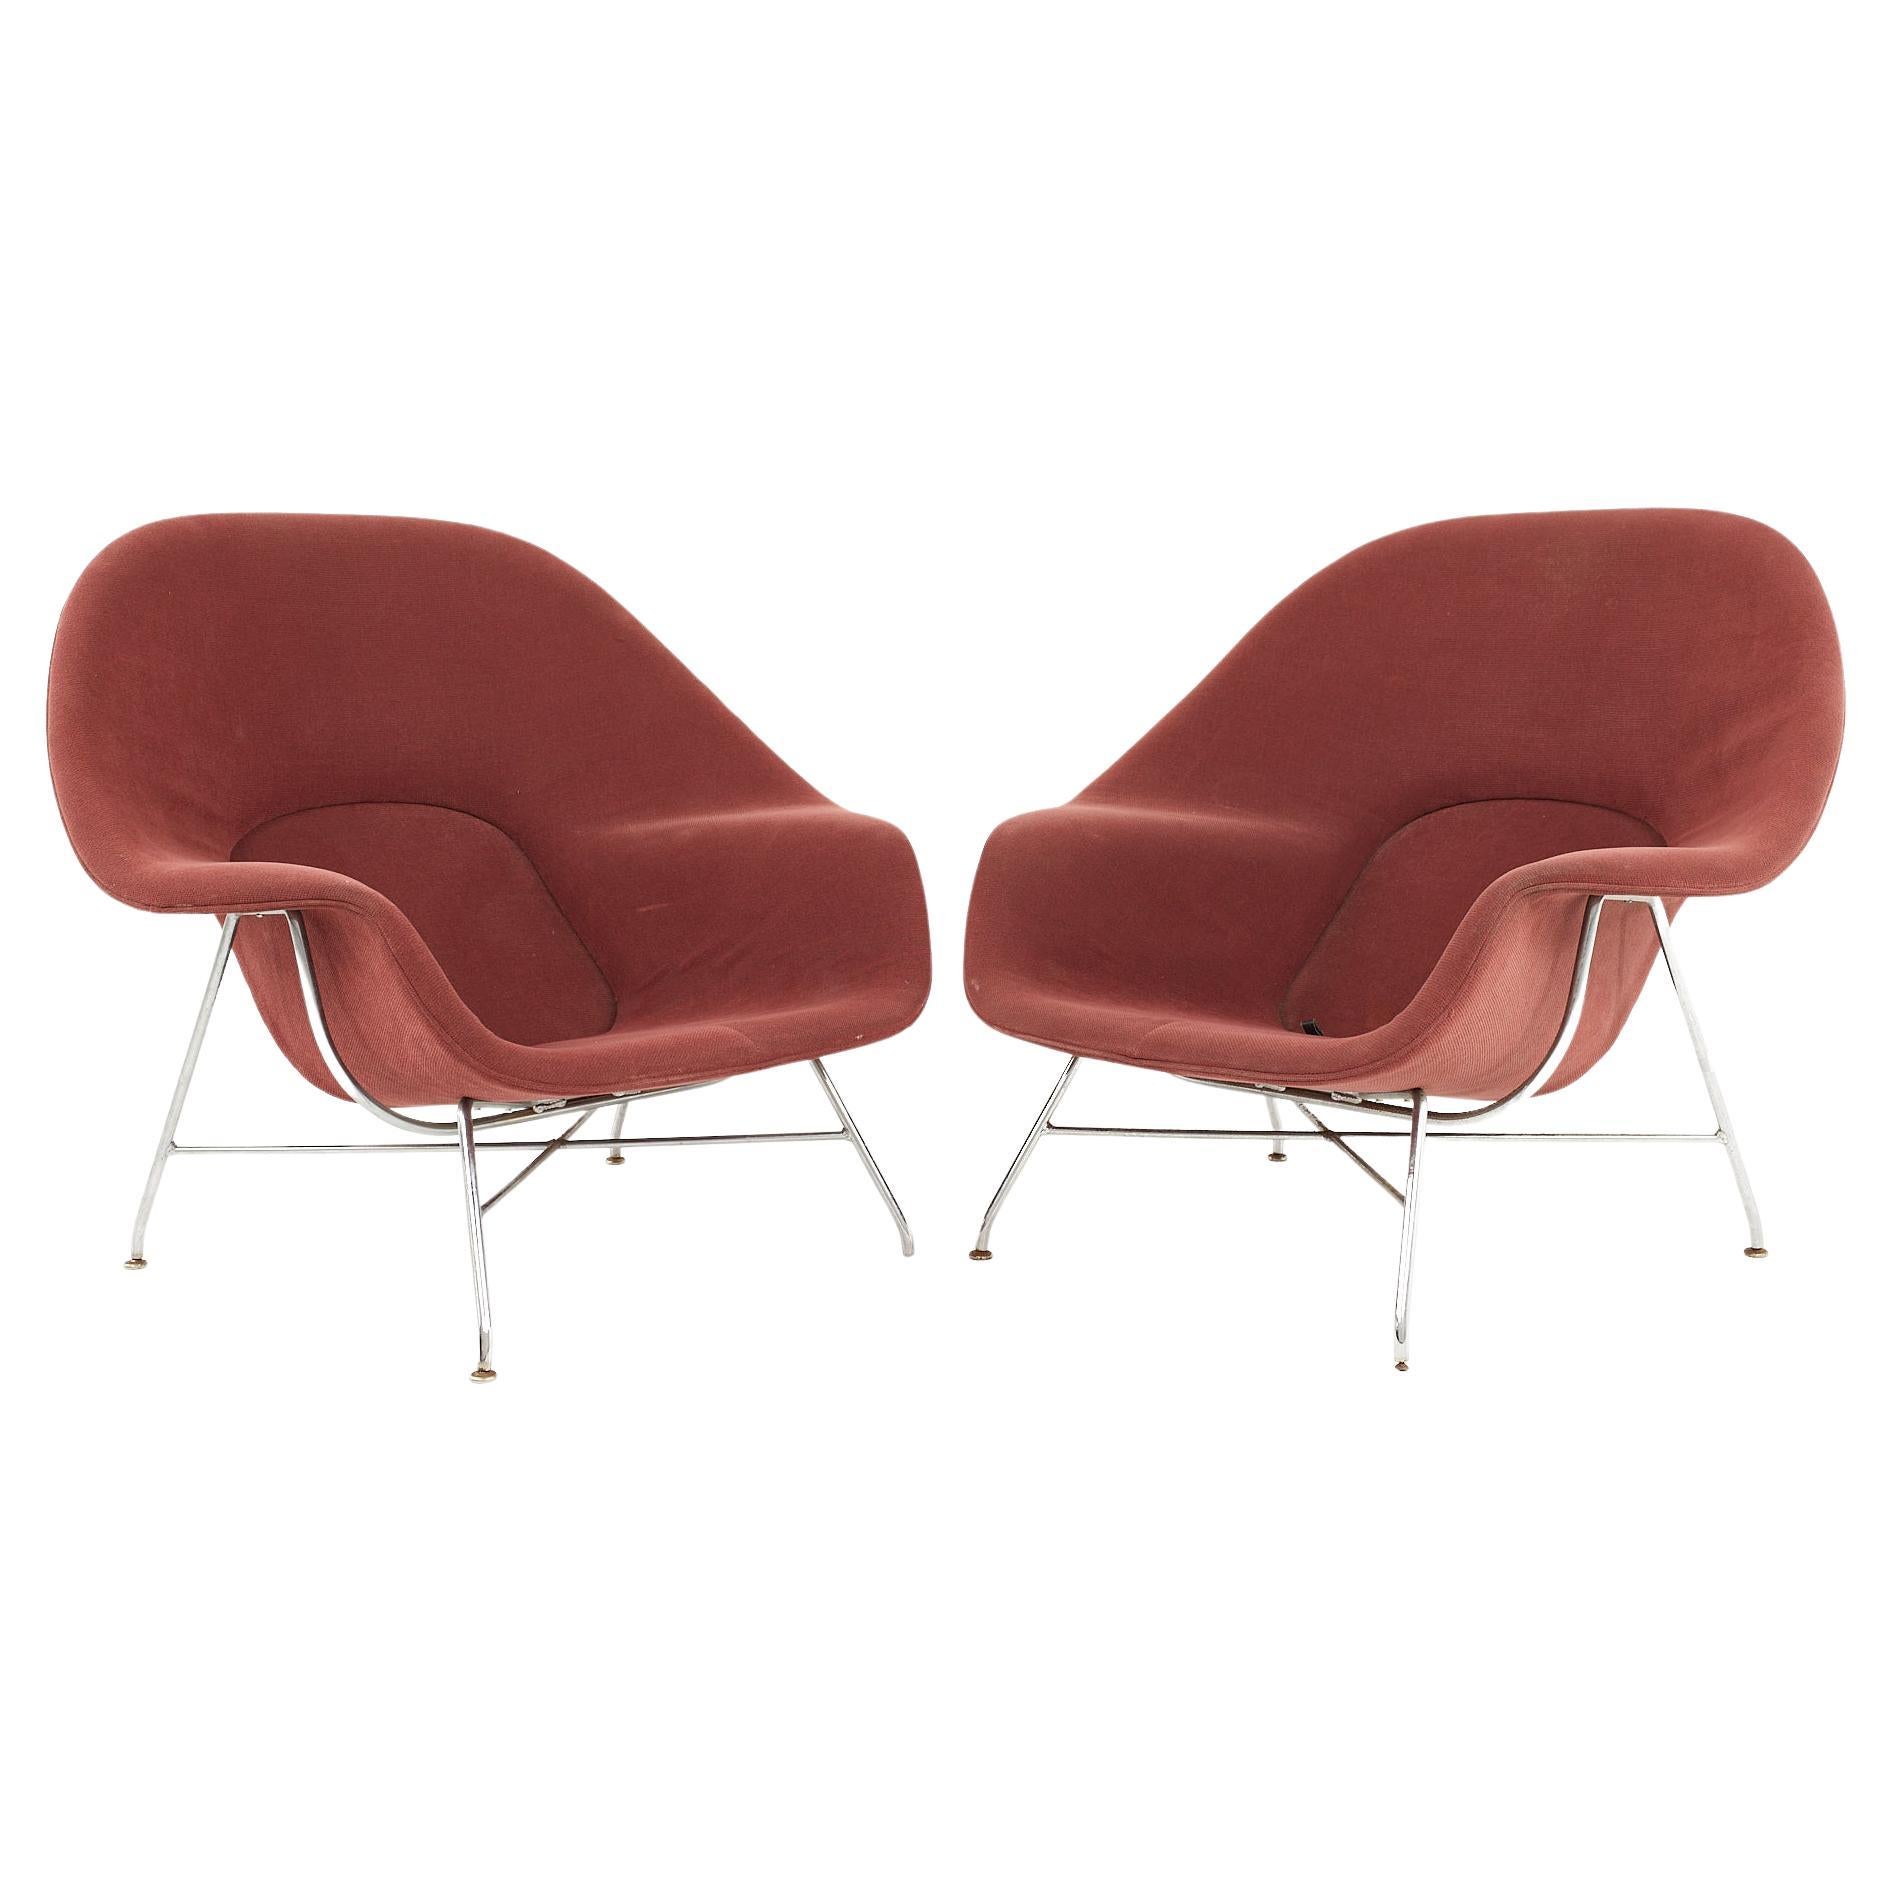 Eero Saarinen for Knoll Mid Century Womb Chair with Chrome Frame, Set of 2